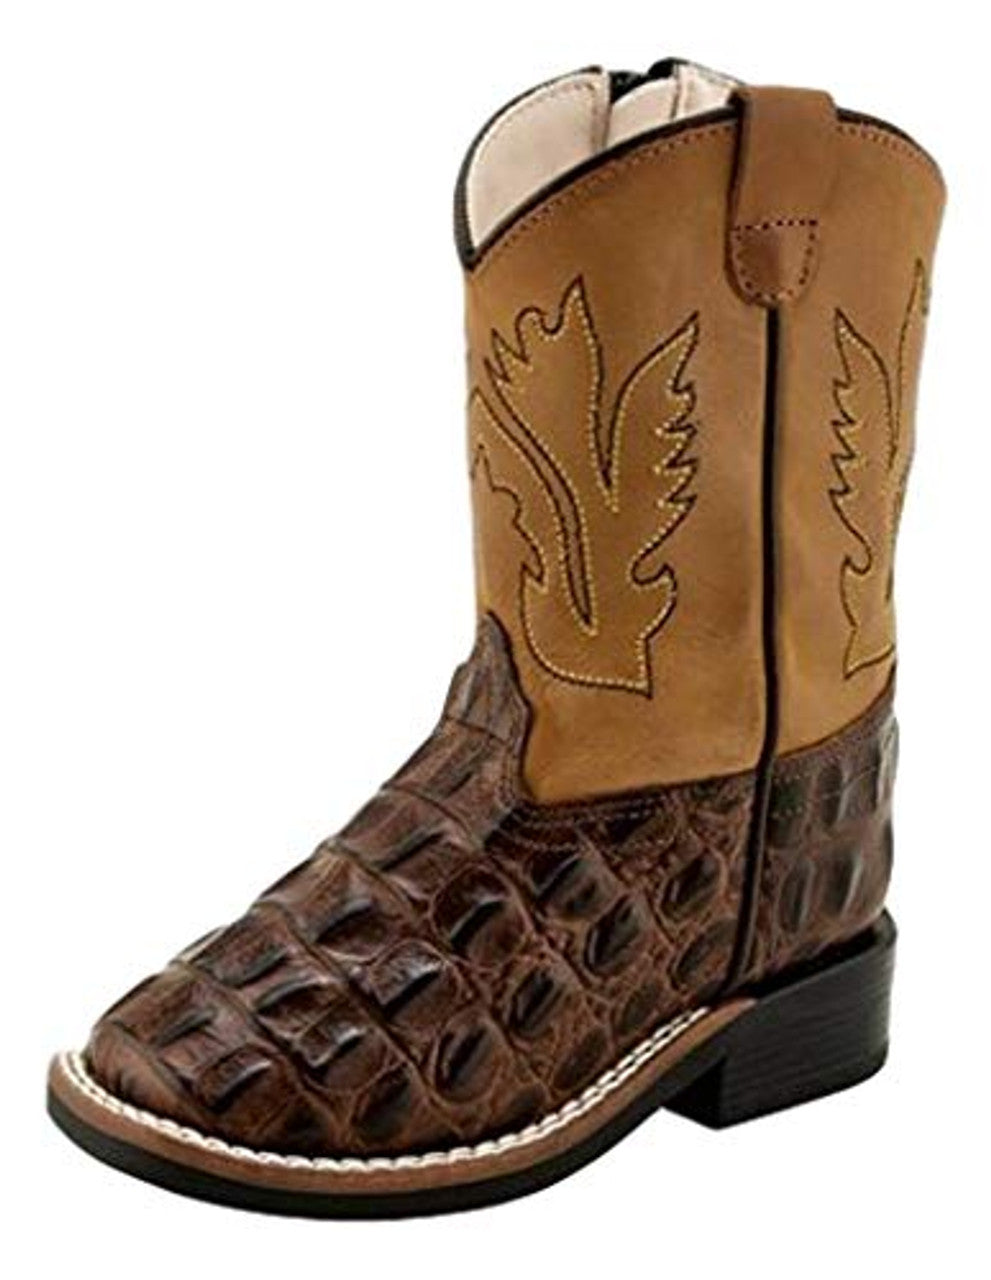 BSI1830 Old West Toddler Caiman Print Boots